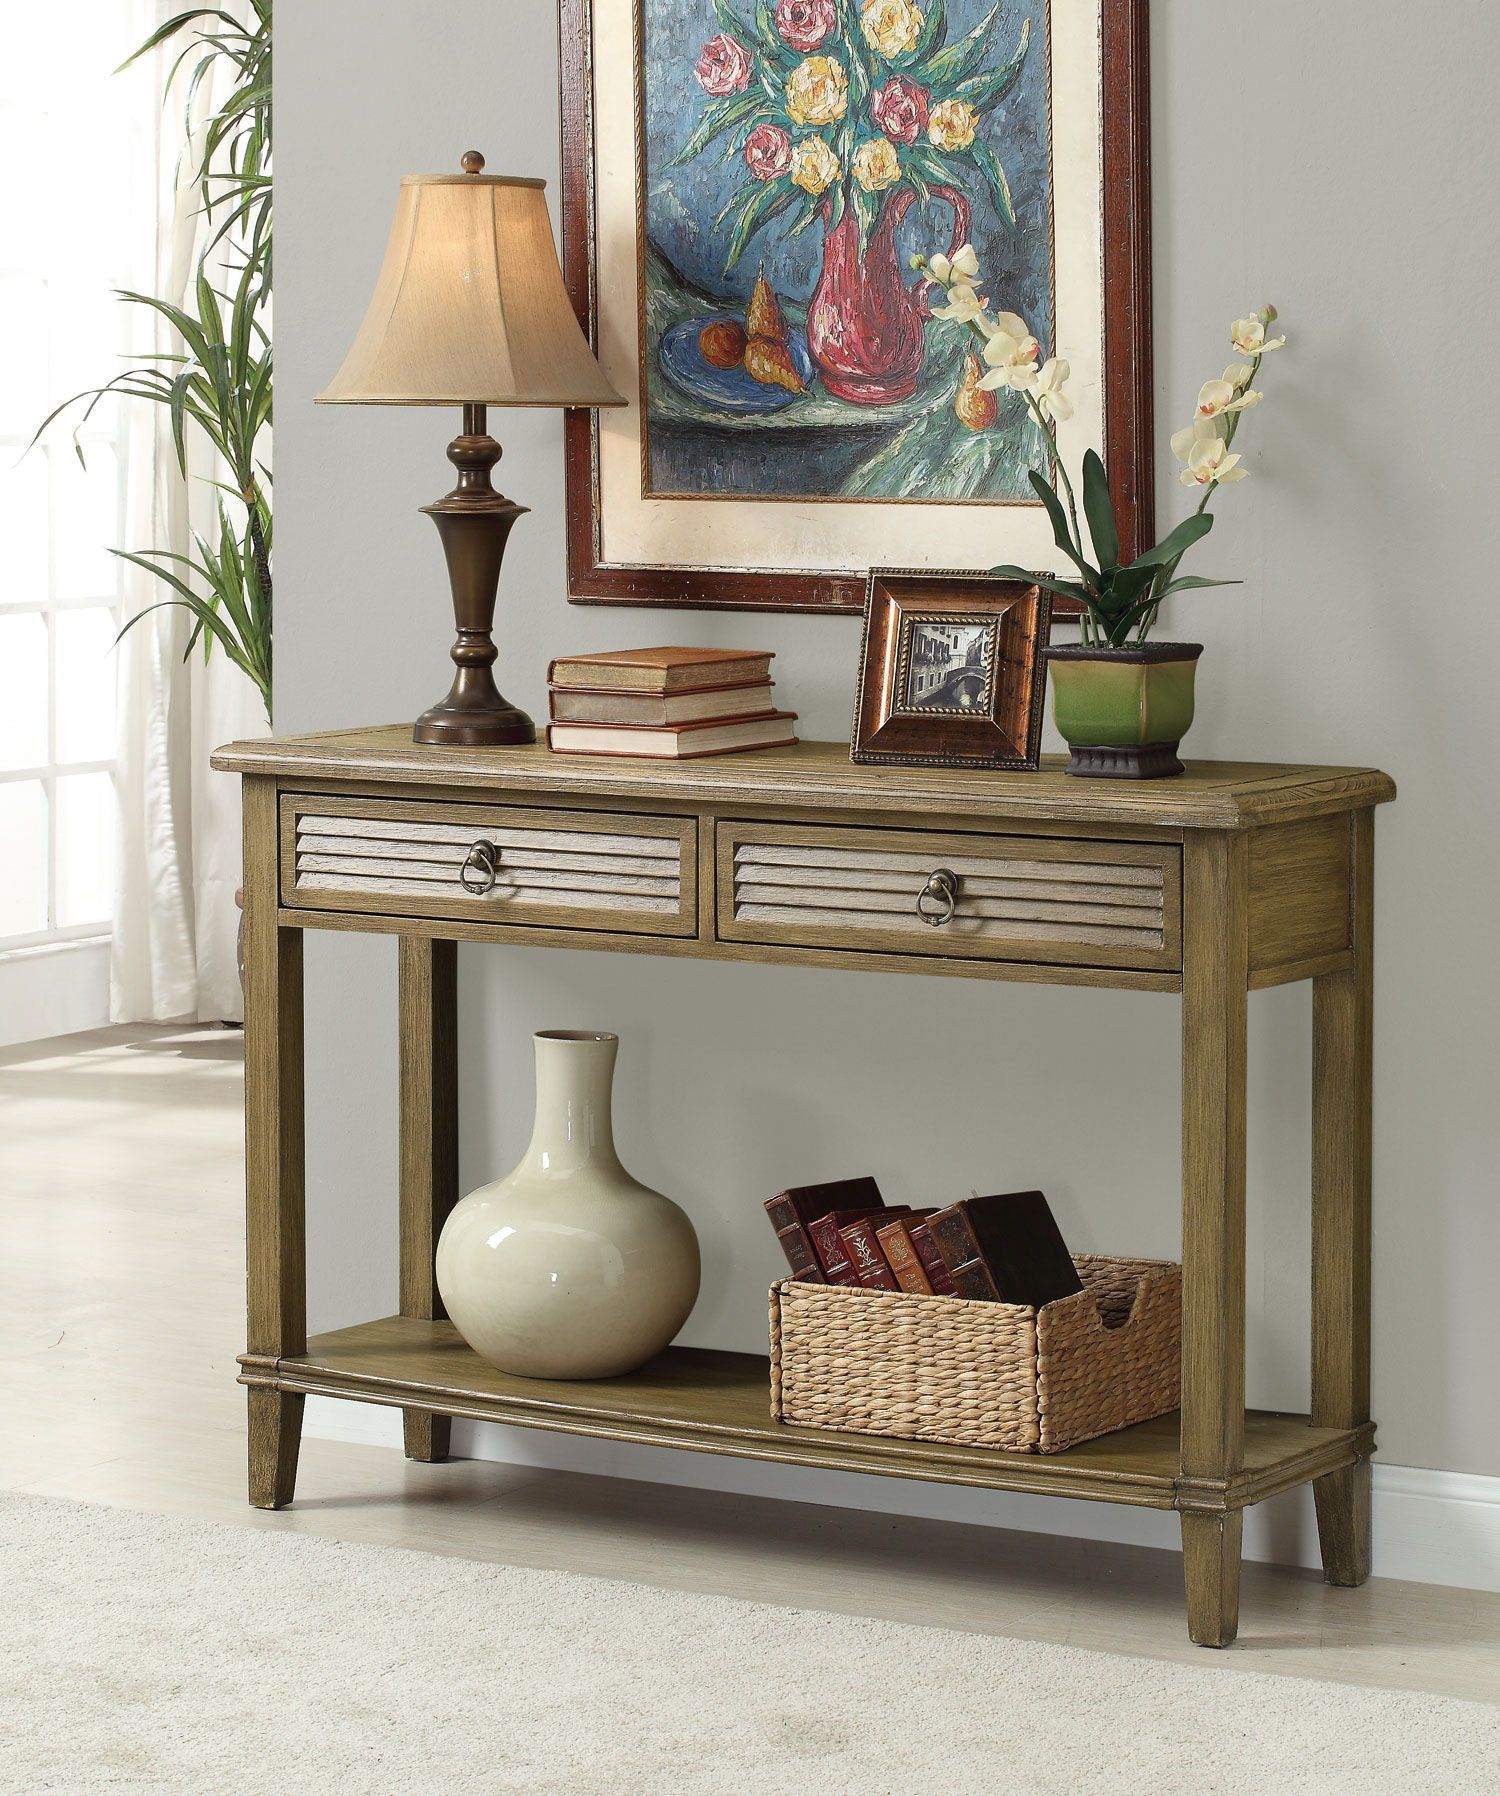 Casual Brown Wood Console Table | The Classy Home With Brown Wood And Steel Plate Console Tables (View 1 of 20)